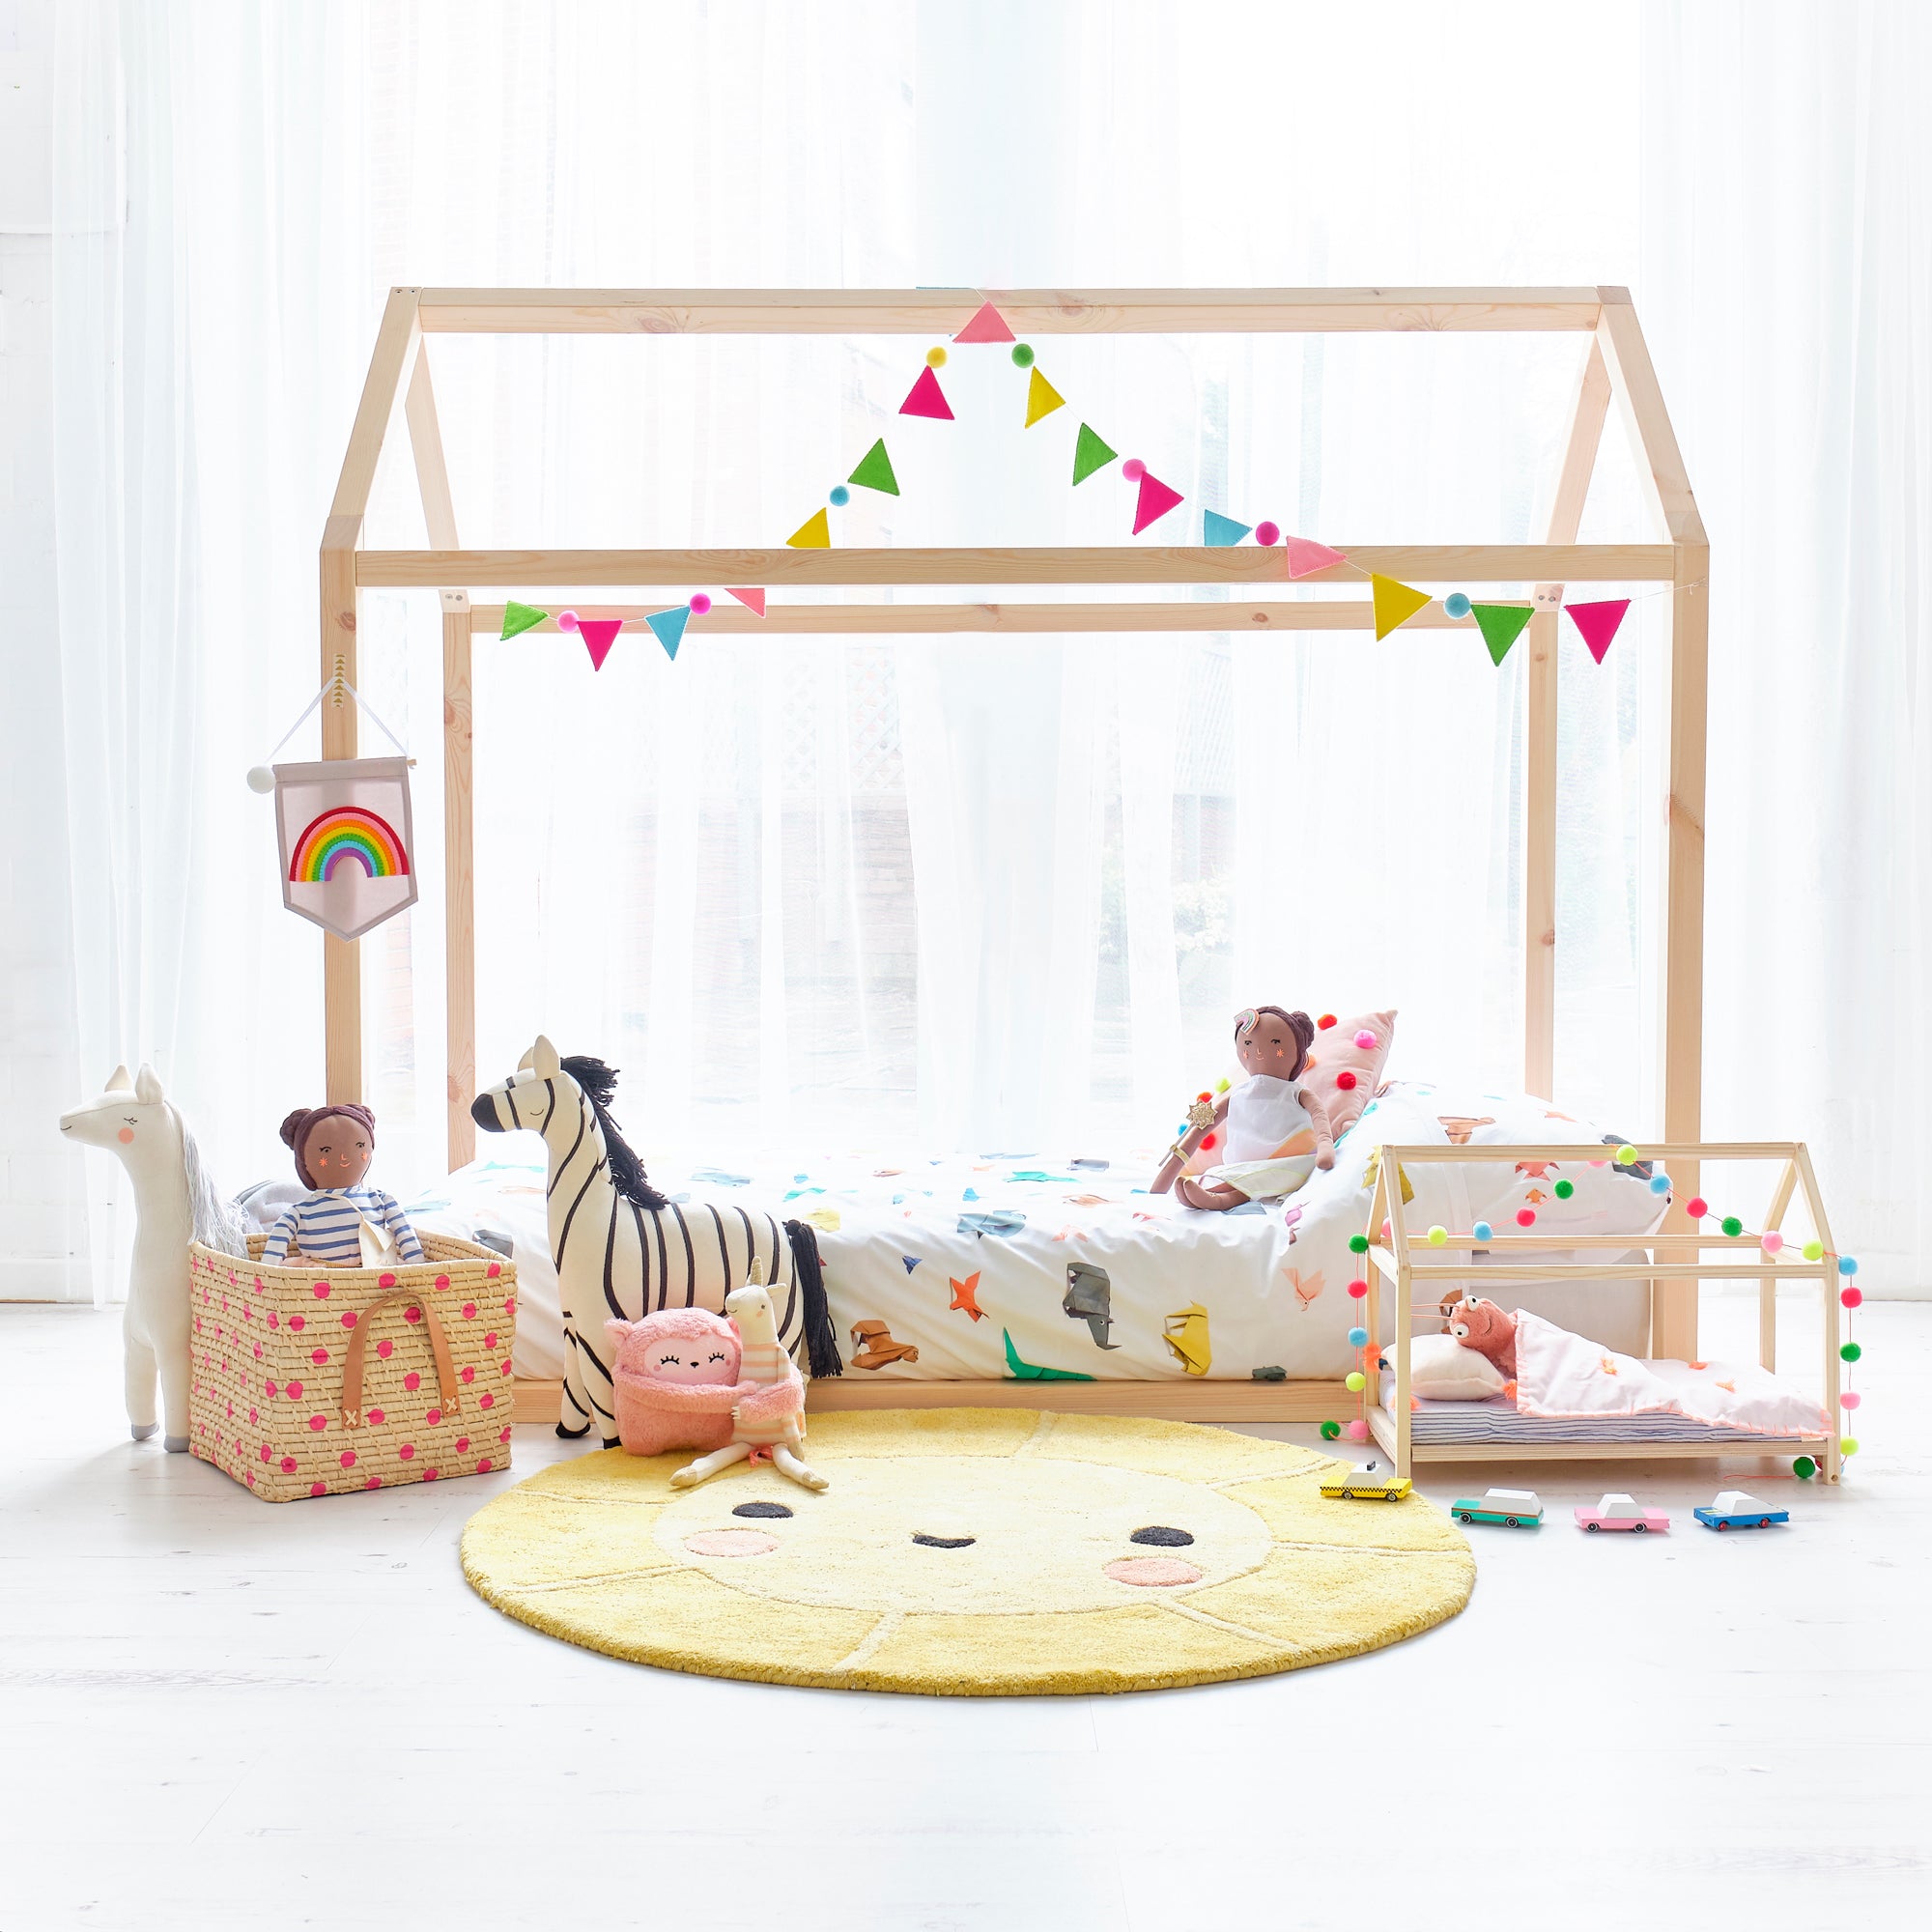 ‘Rainbow Bright’ Children’s Bedroom, Toys and Accessories, styled by Bobby Rabbit.